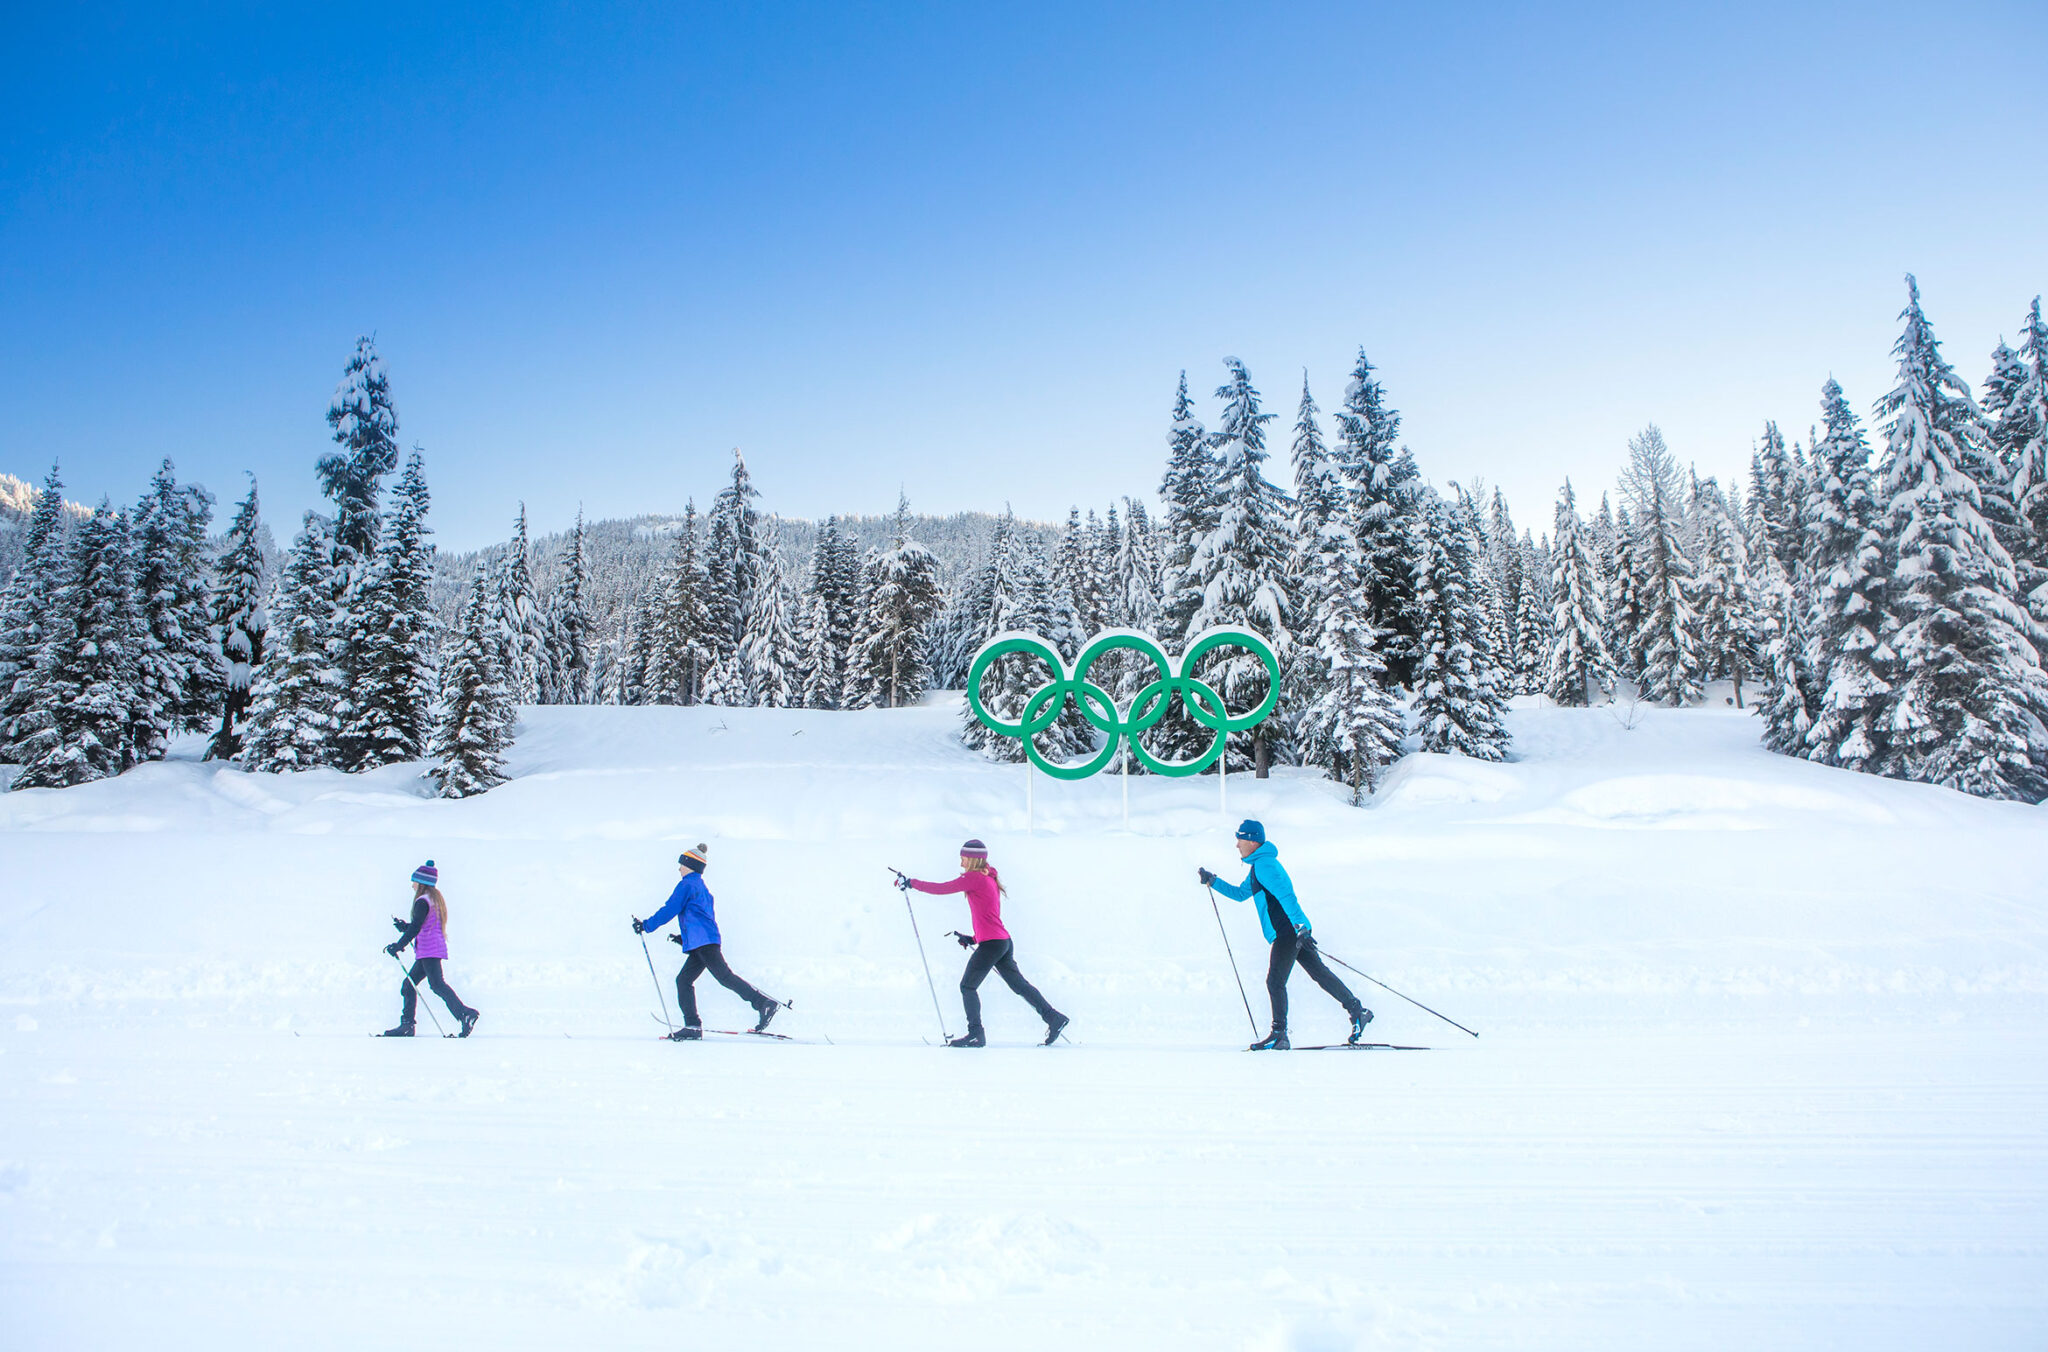 A family cross-country ski past the Olympic rings in Whistler.